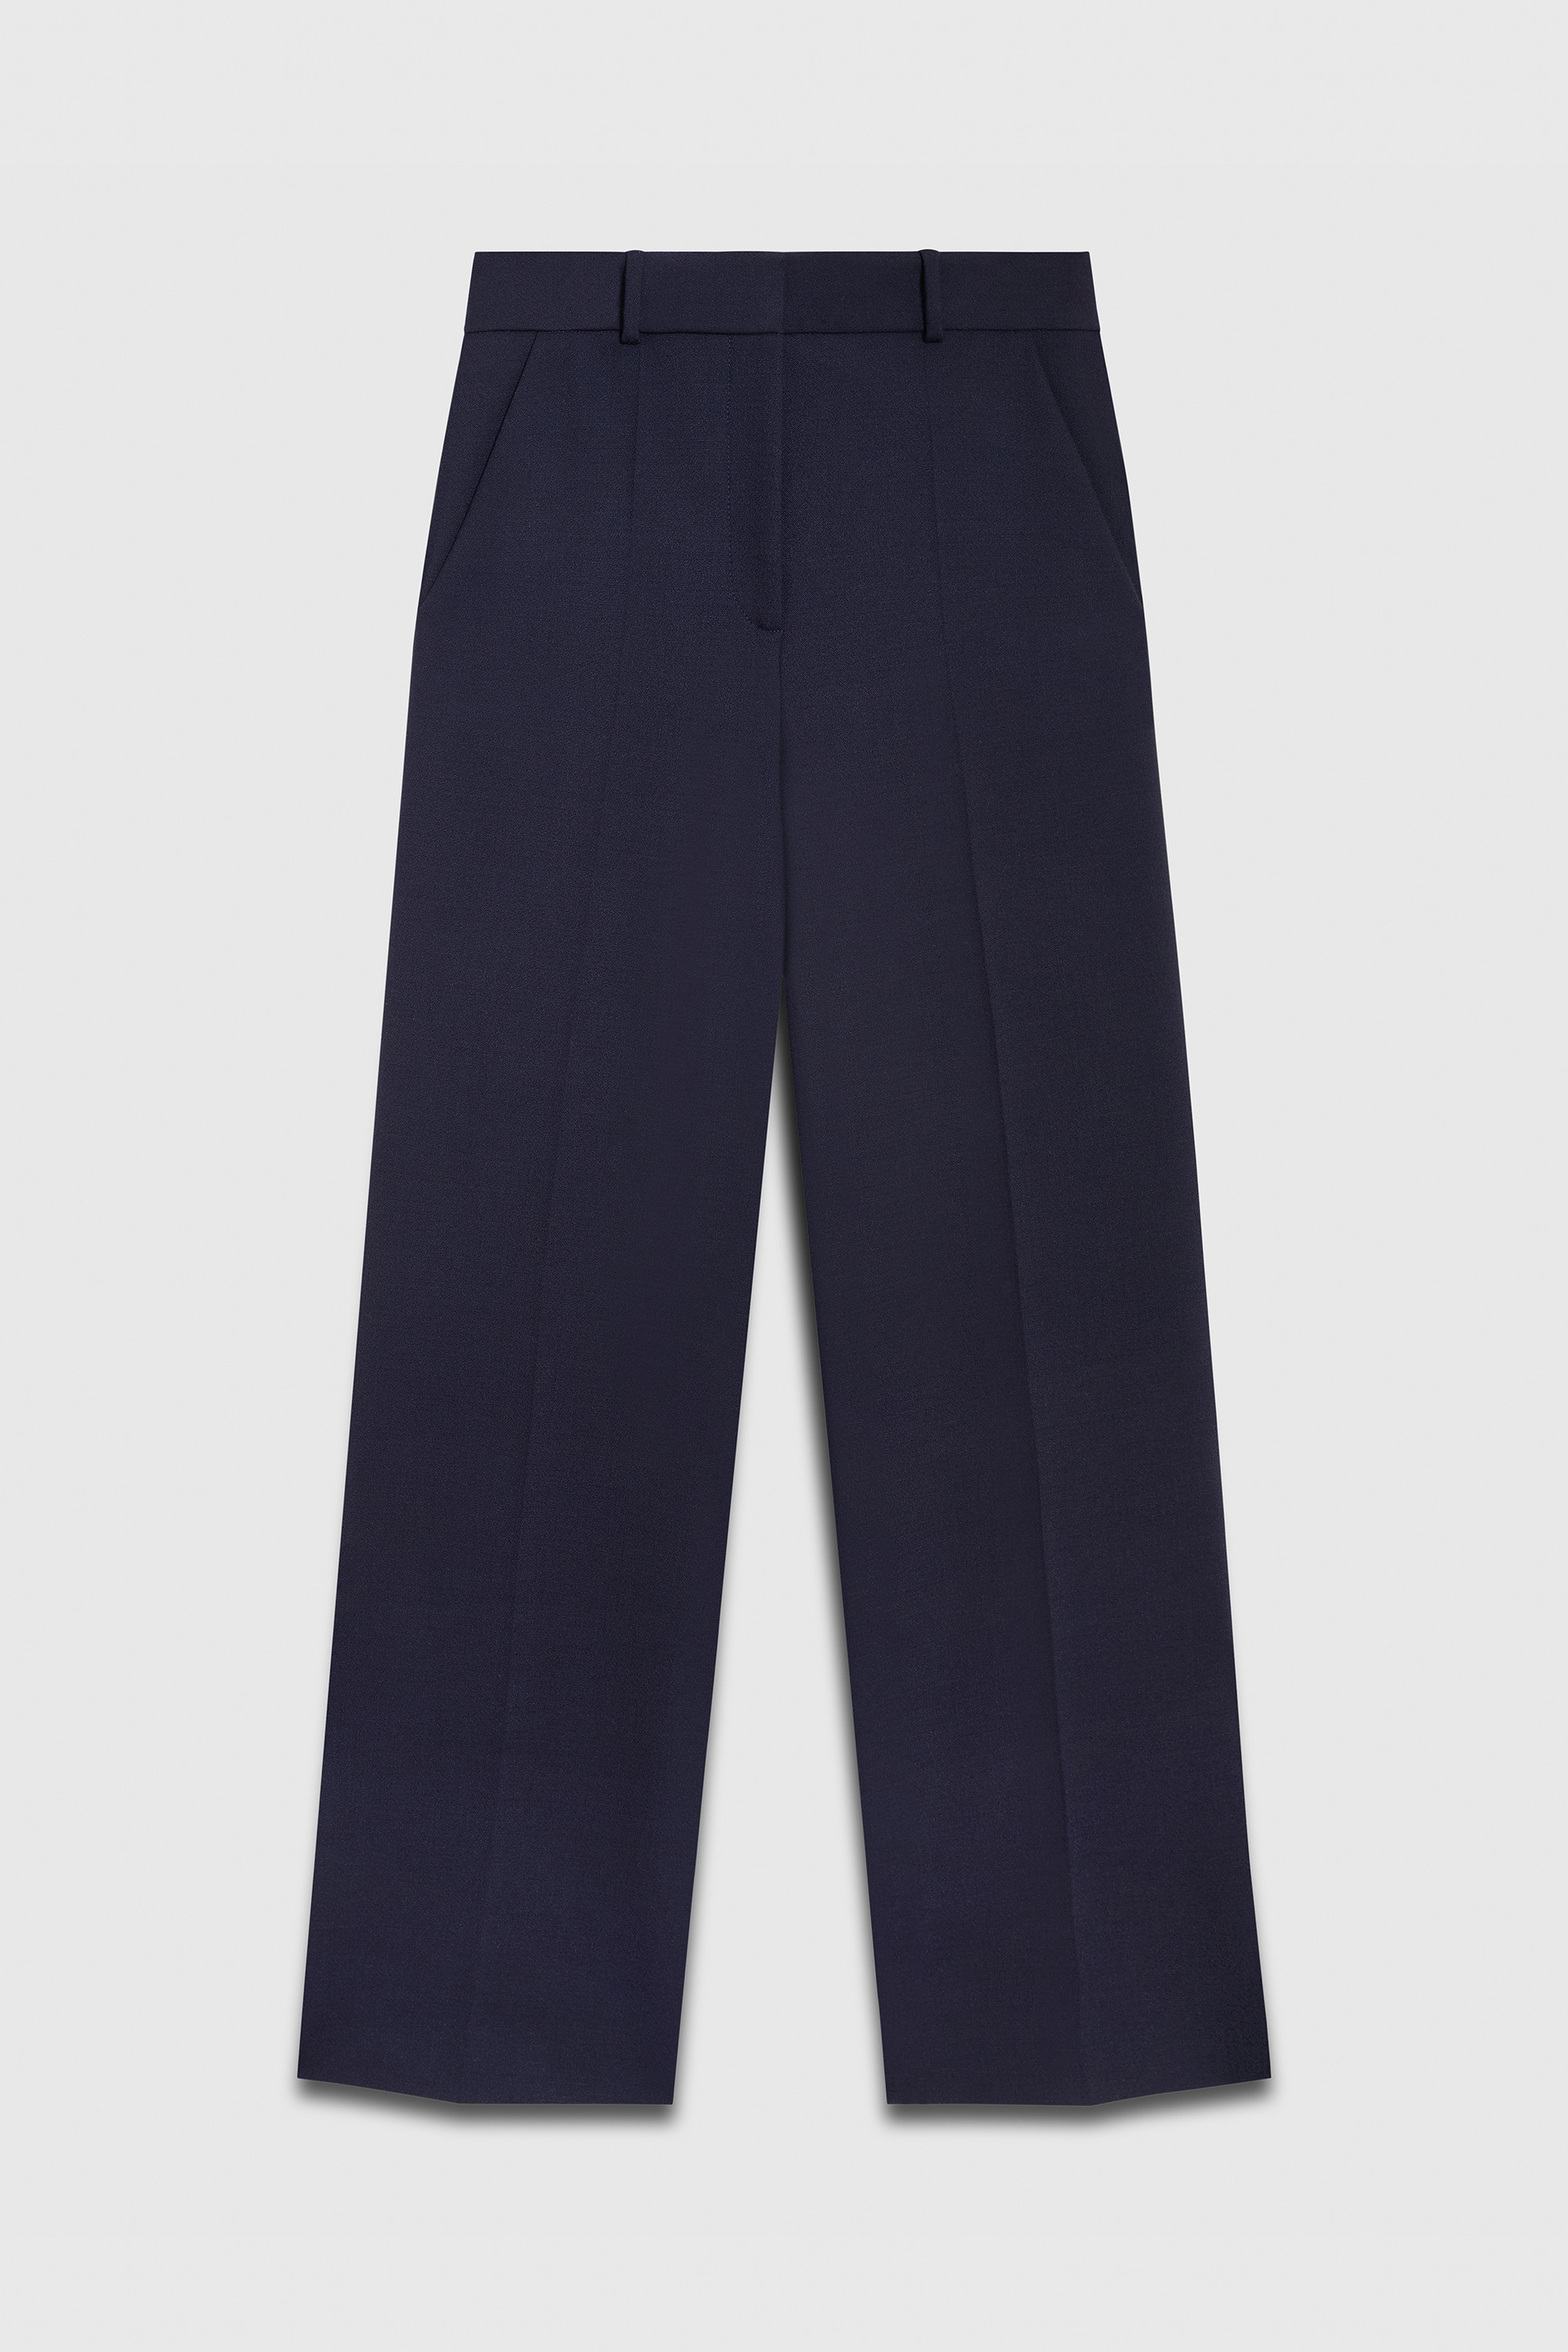 Ultimate Wool Alzira Straight Flared Trousers Navy - Welcome to the ...